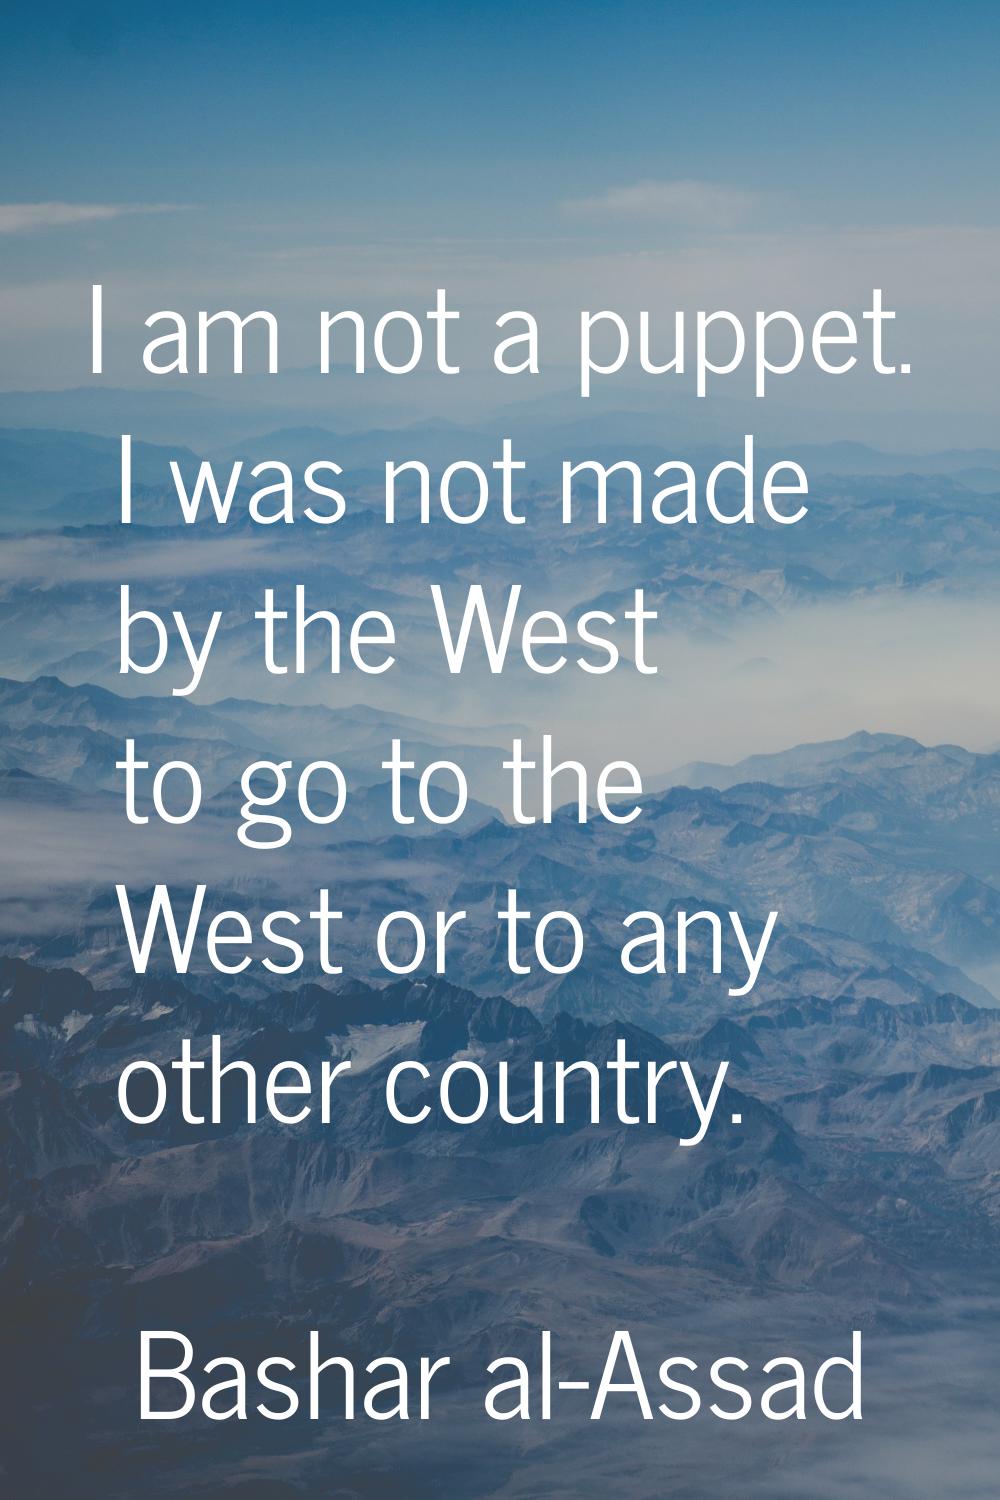 I am not a puppet. I was not made by the West to go to the West or to any other country.